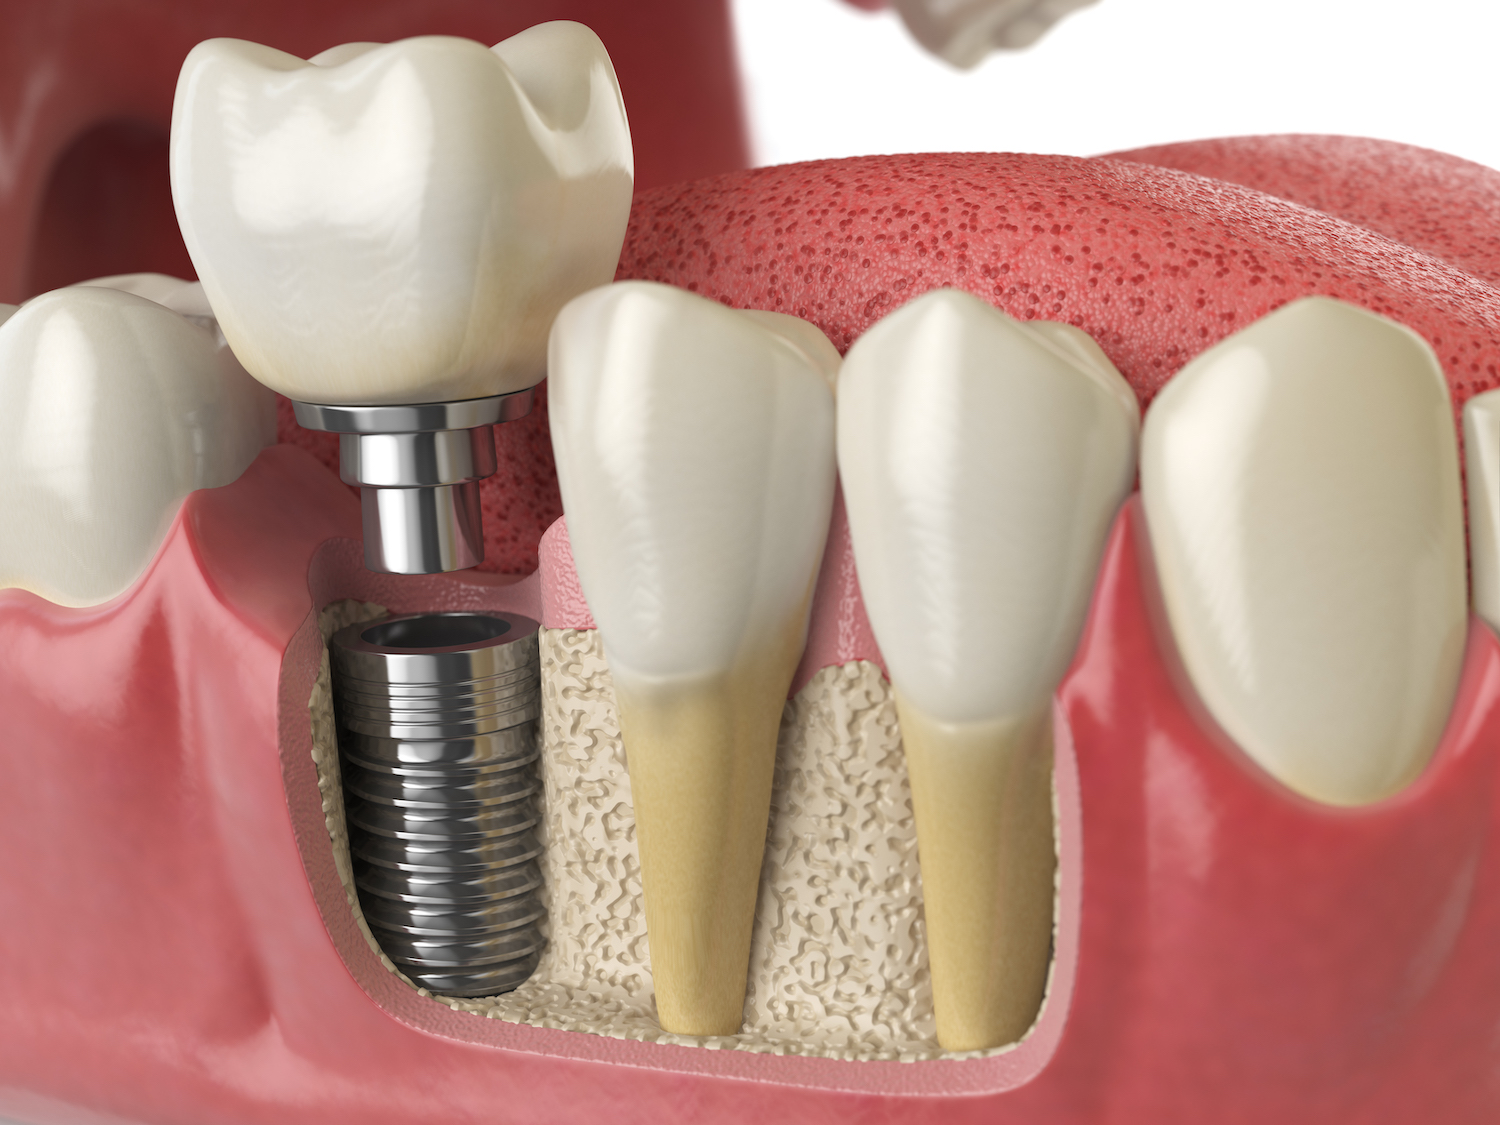 Closeup of a dental implant next to natural teeth, showing the roots implanted into the jawbone